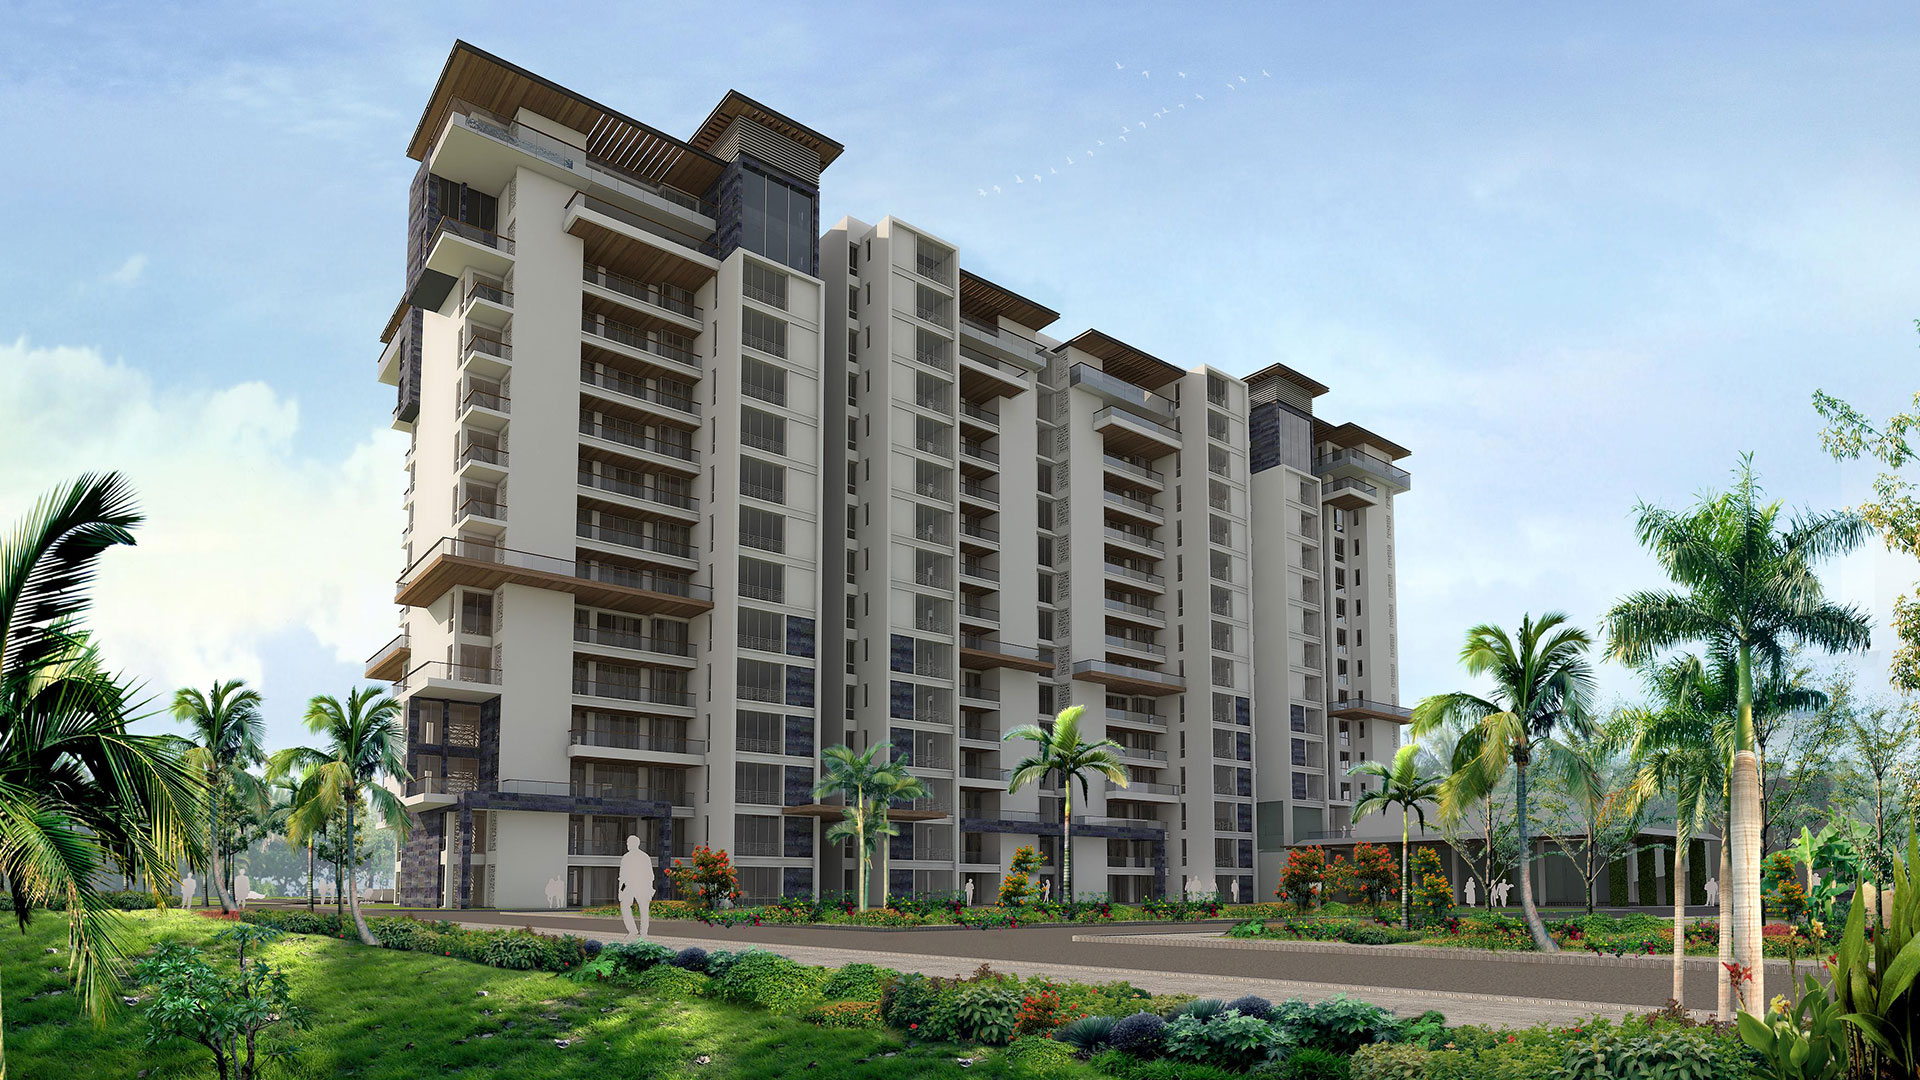 Divyashree introduces 3 Types of Linked Joint Family Home in Divyasree 77 Place Update